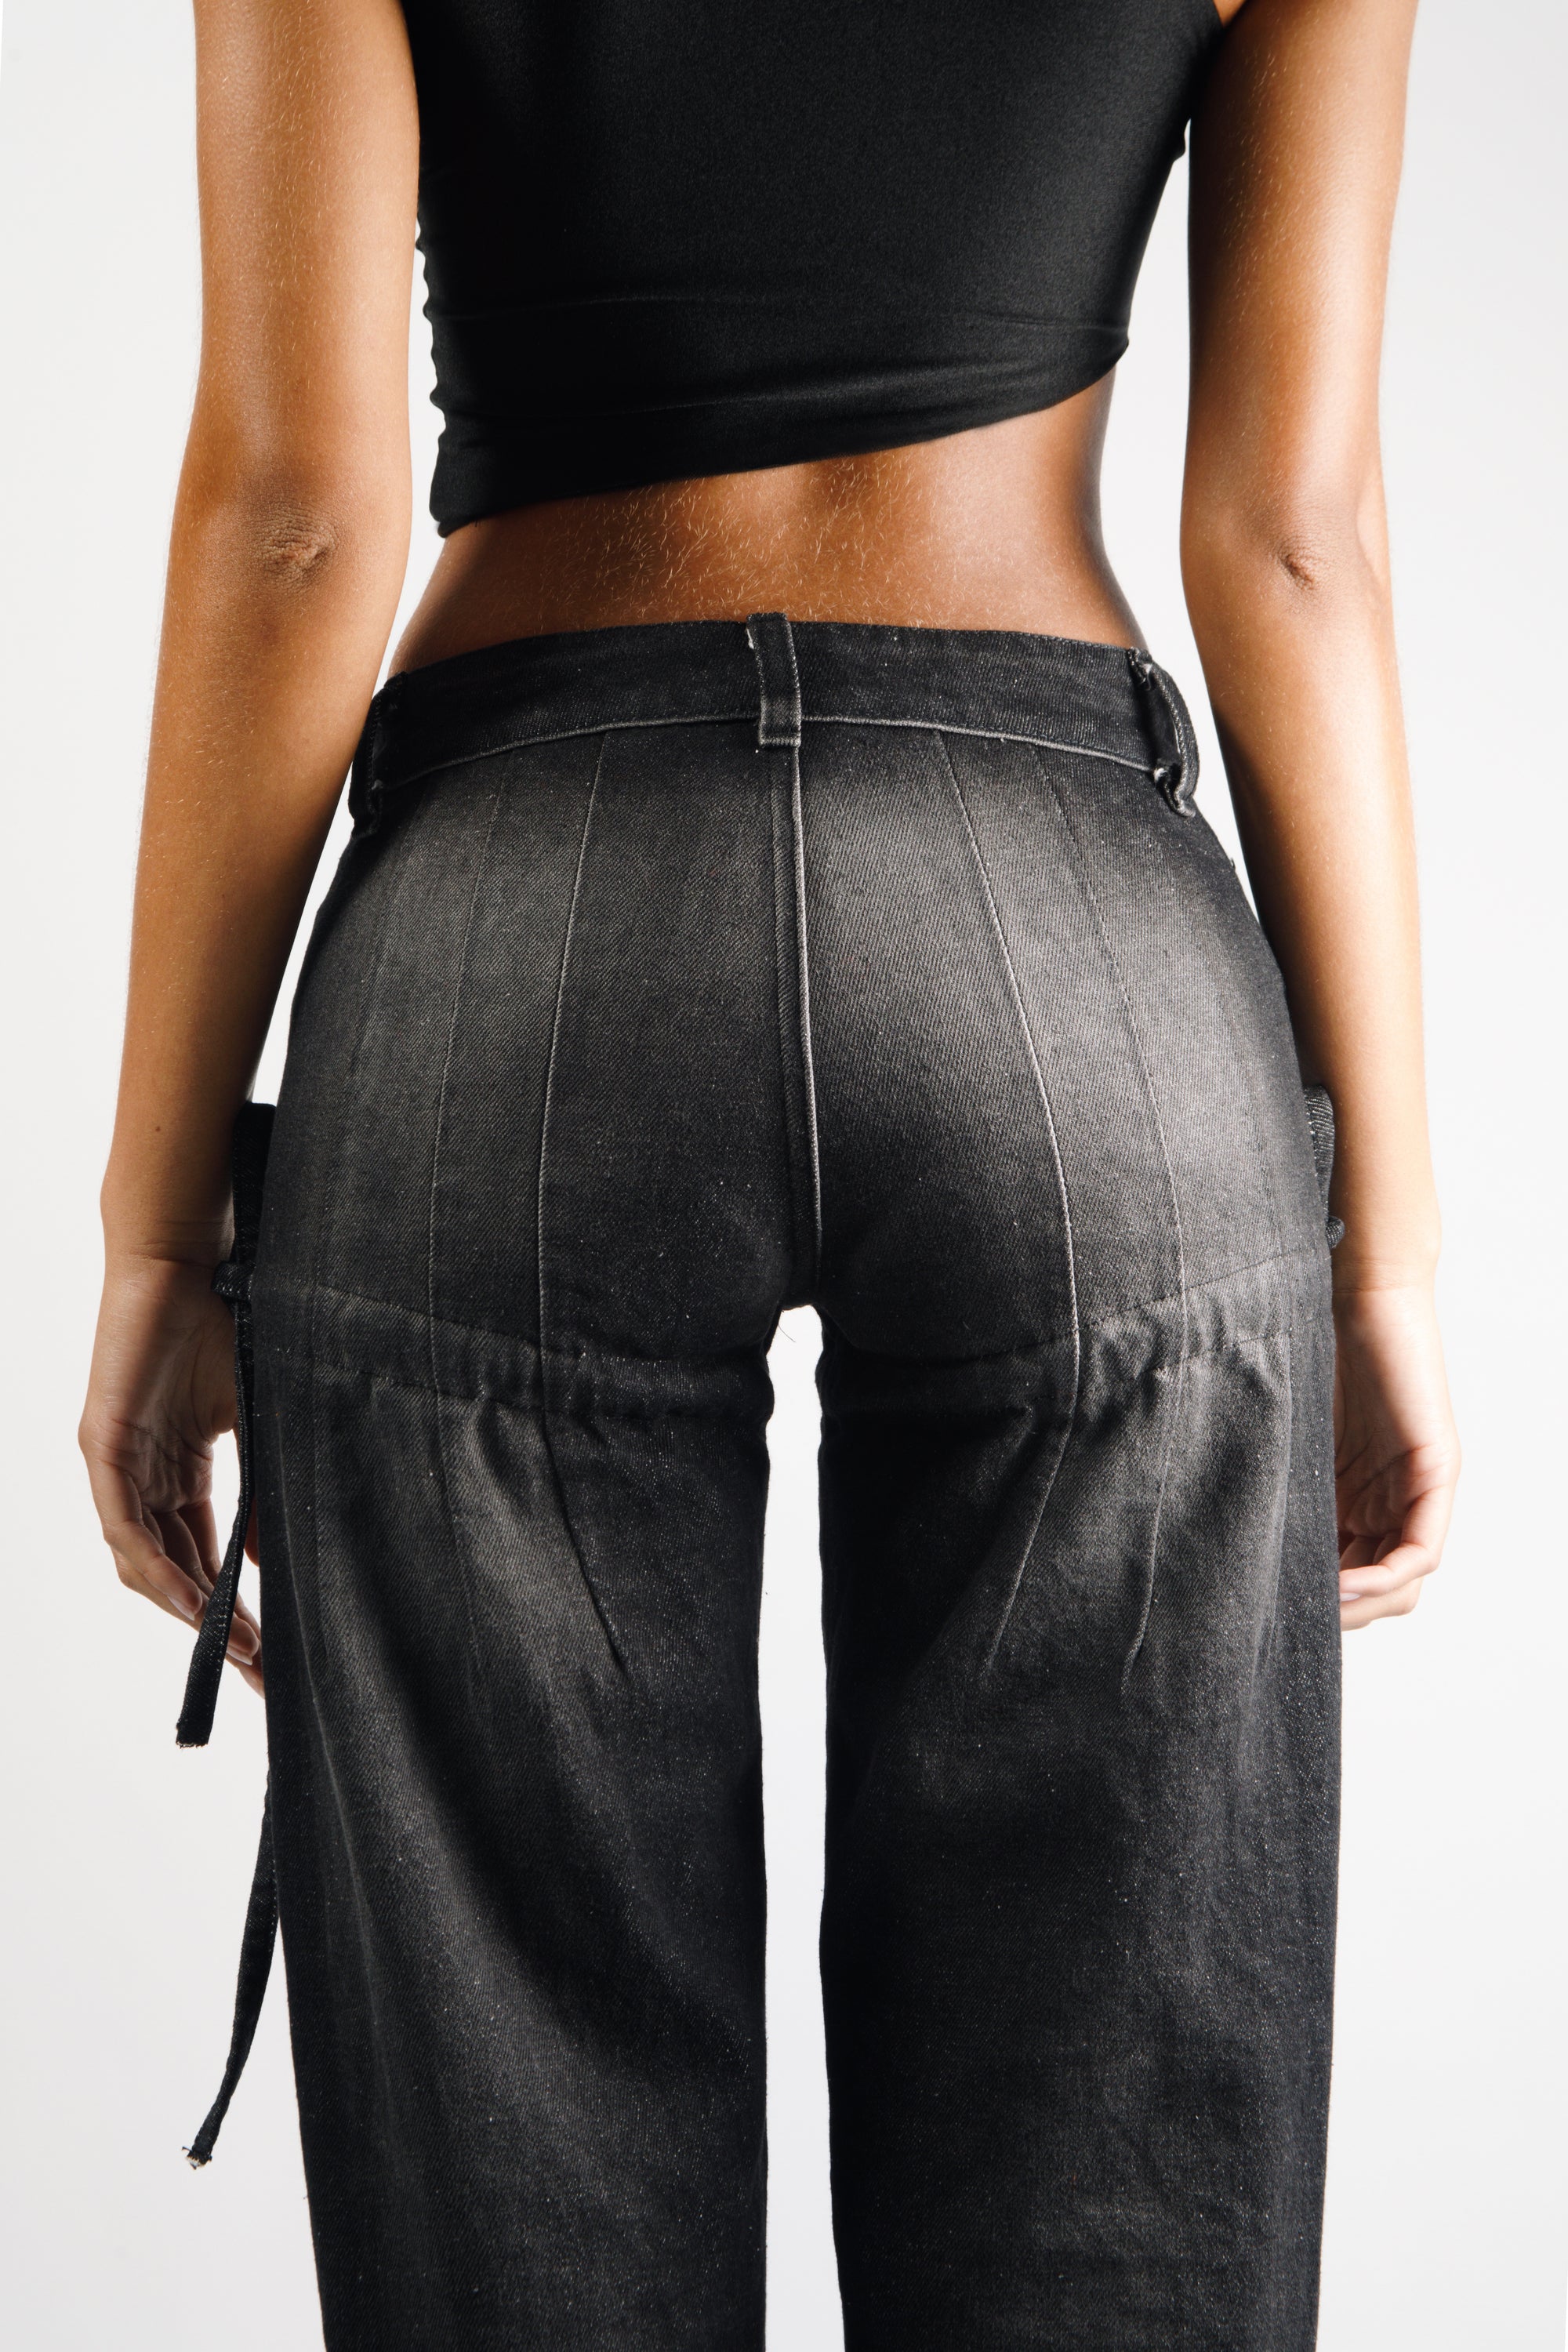 Long pants in washed black cotton with darts and opening slits on the back, adjustable cords to embellish the silhouette - back